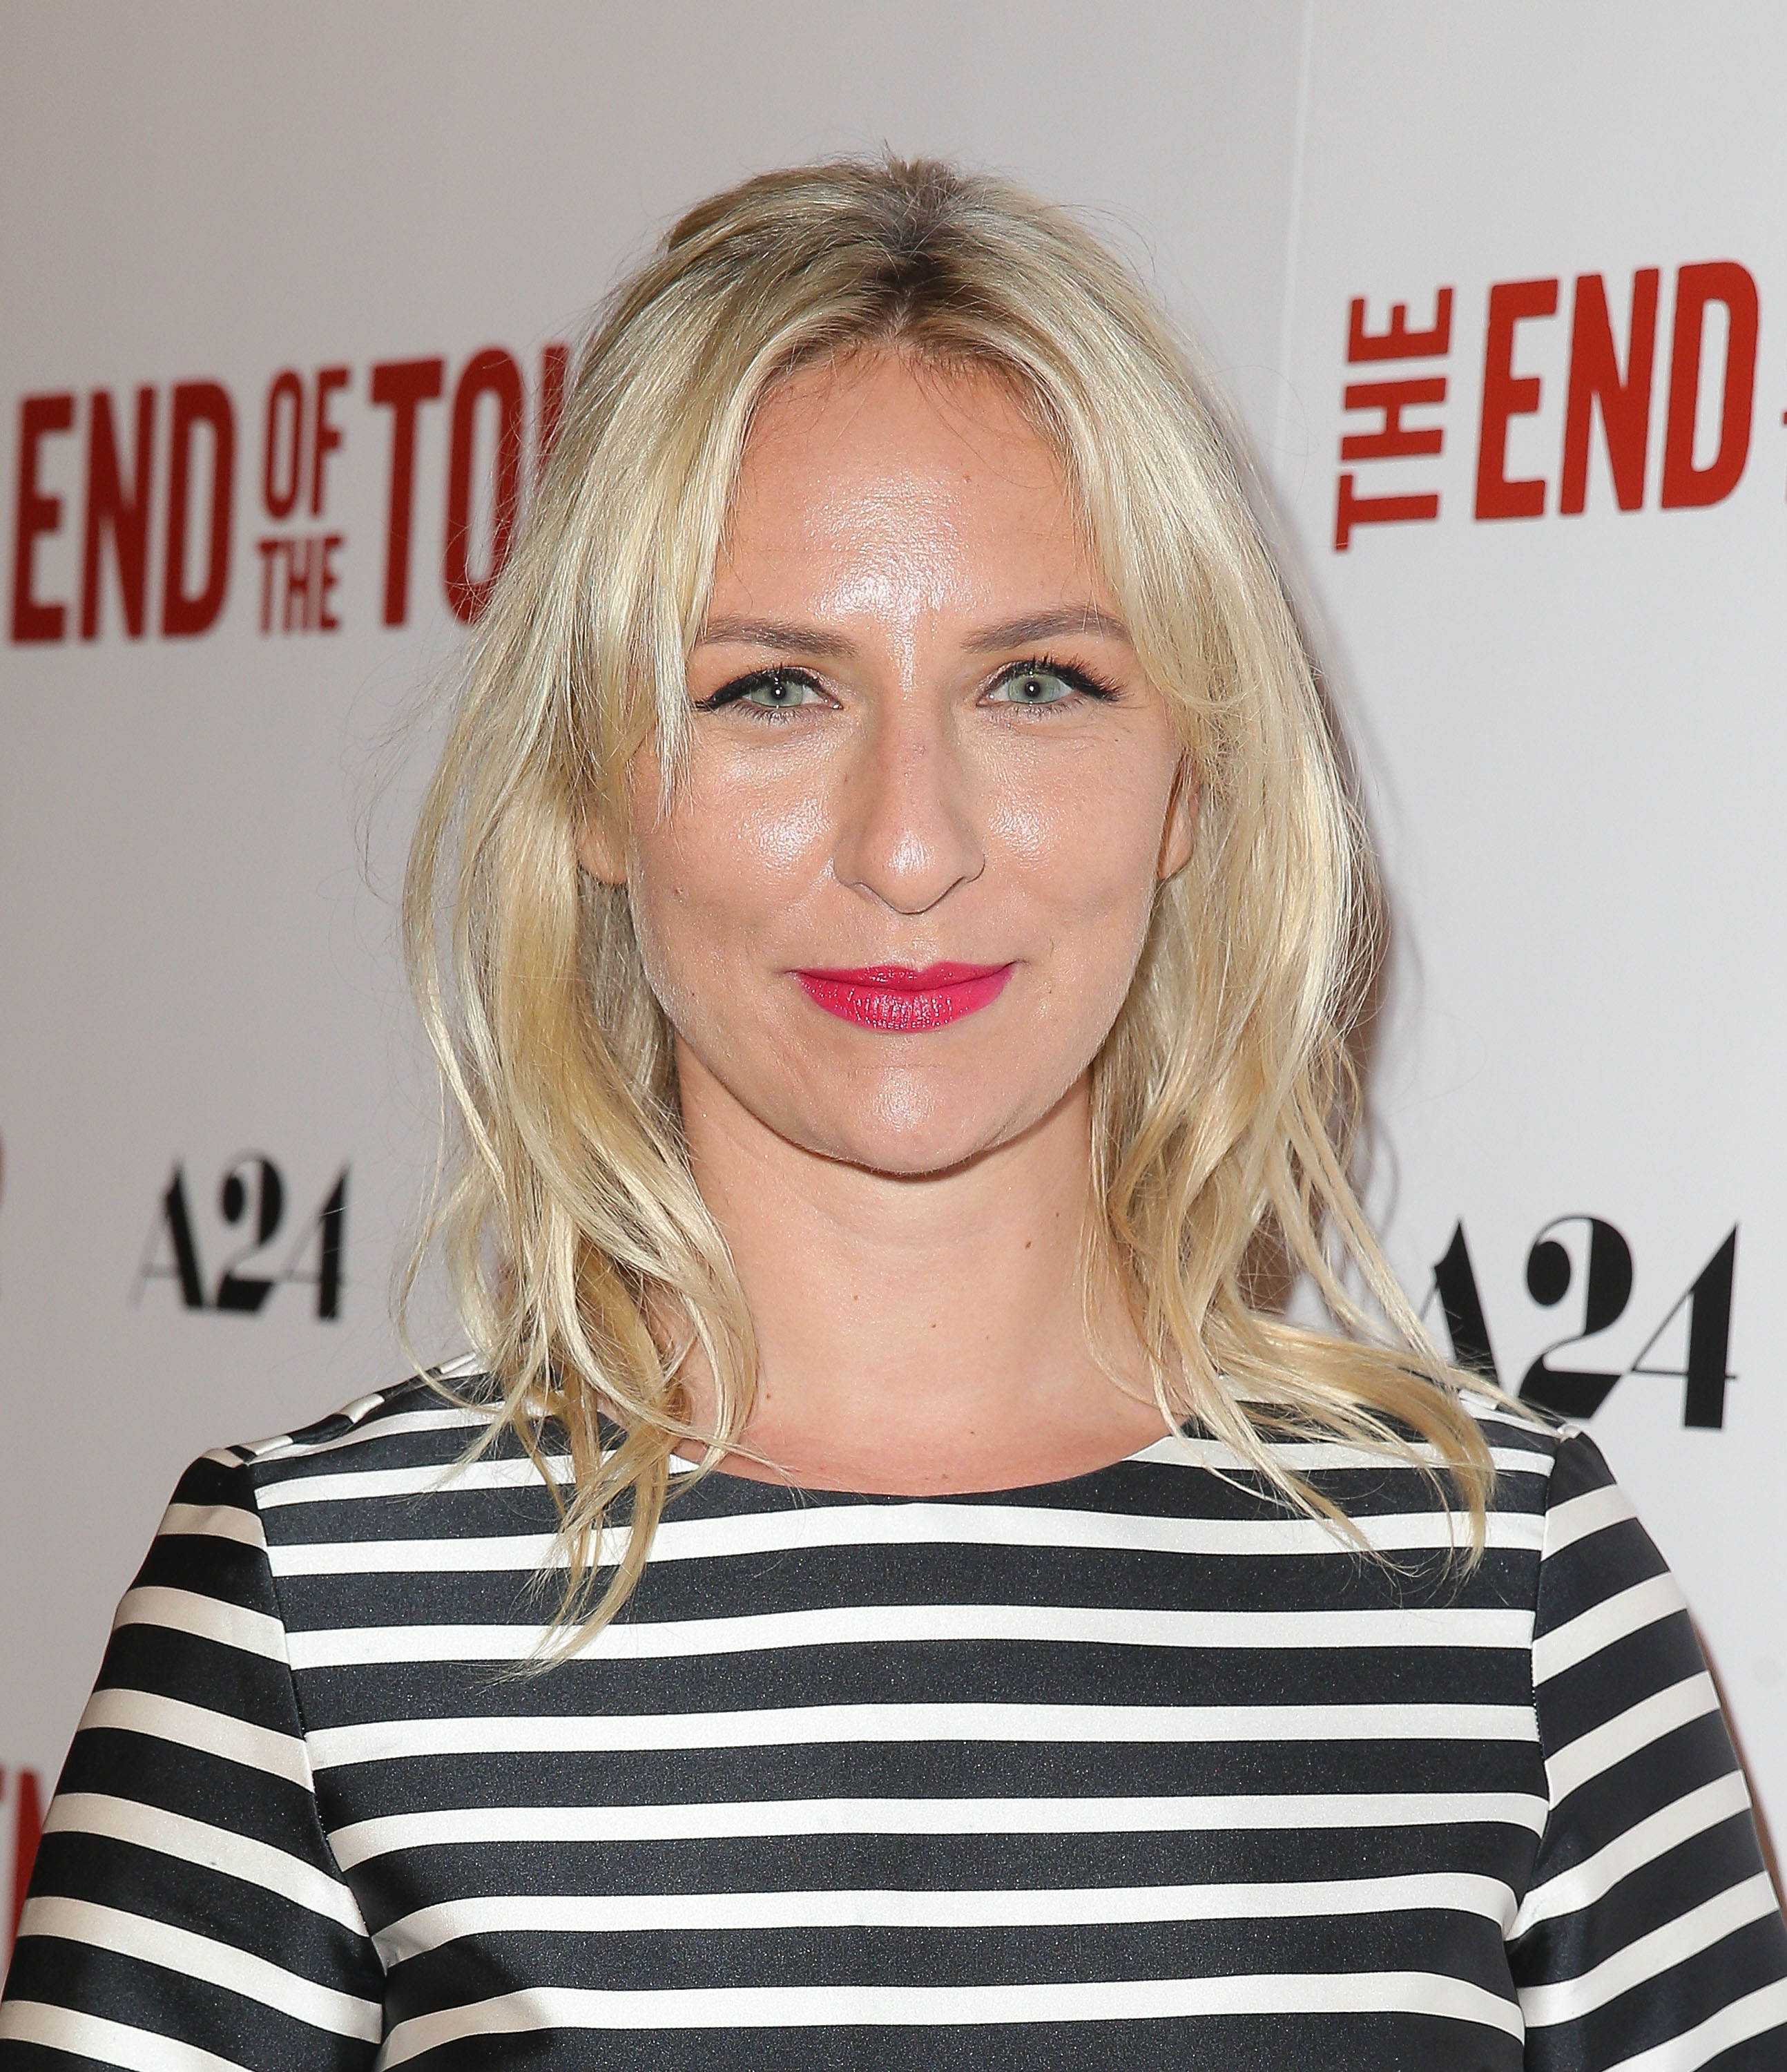 Mickey Sumner attends the premiere of A24's 'The End Of The Tour' at Writers Guild Theater in Beverly Hills, California on July 13, 2015. | Source: Getty Images